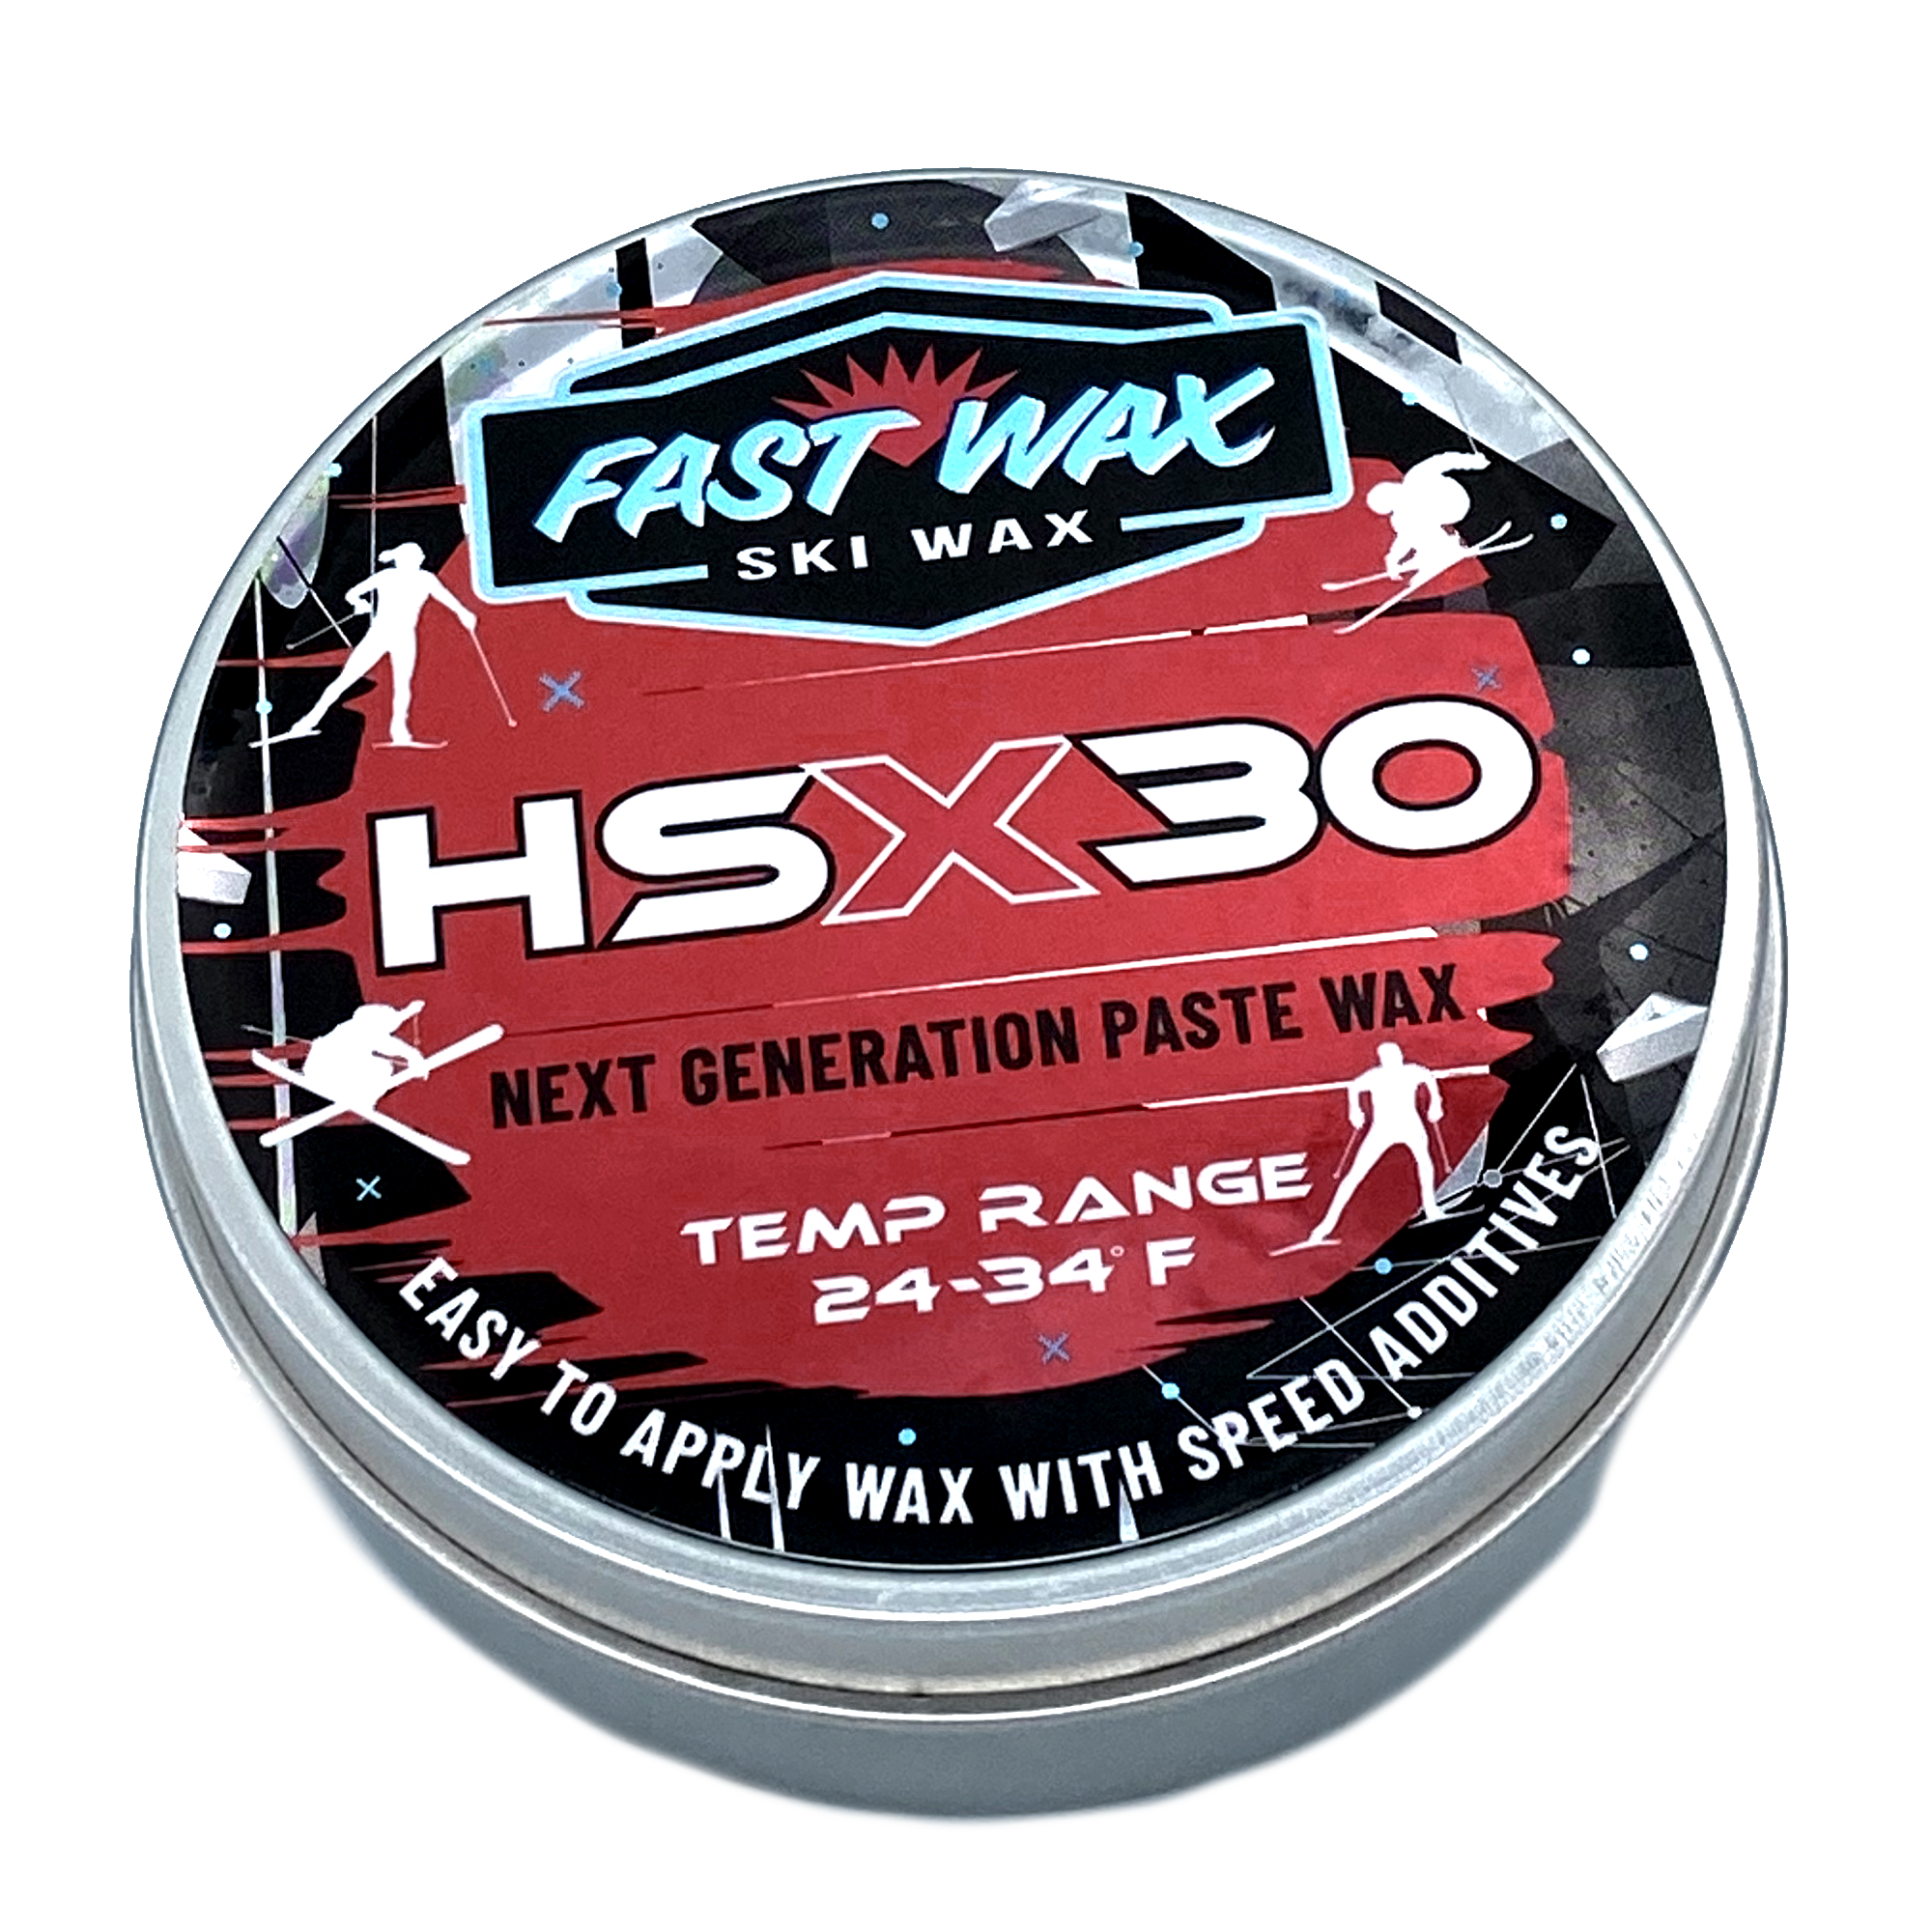 Fast Wax HSX 10,20,30 Paste Wax 60g, Buy all and SAVE! - Ski Shop